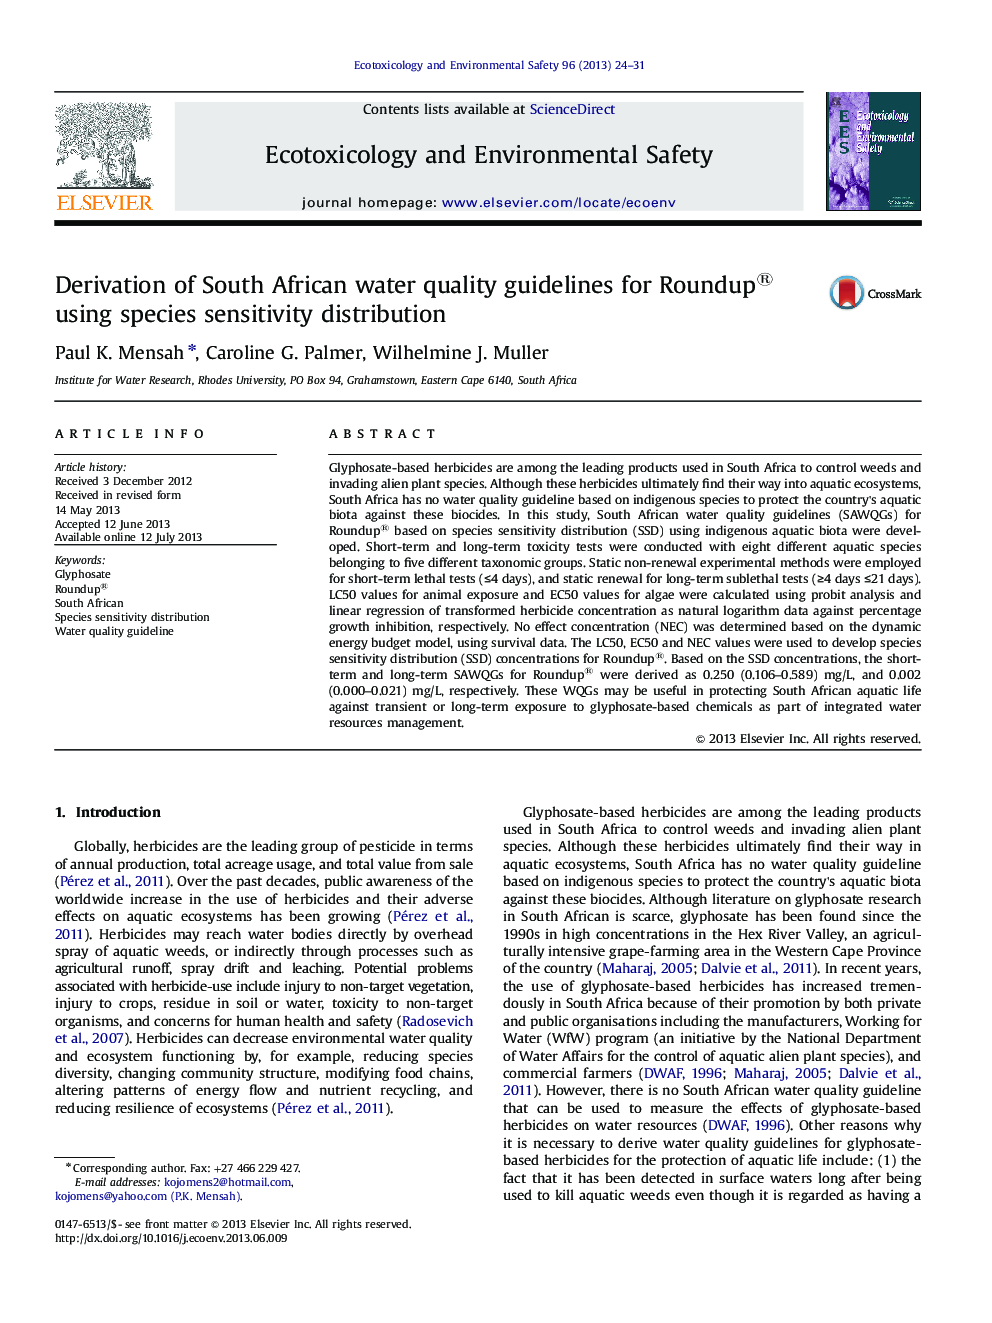 Derivation of South African water quality guidelines for Roundup® using species sensitivity distribution